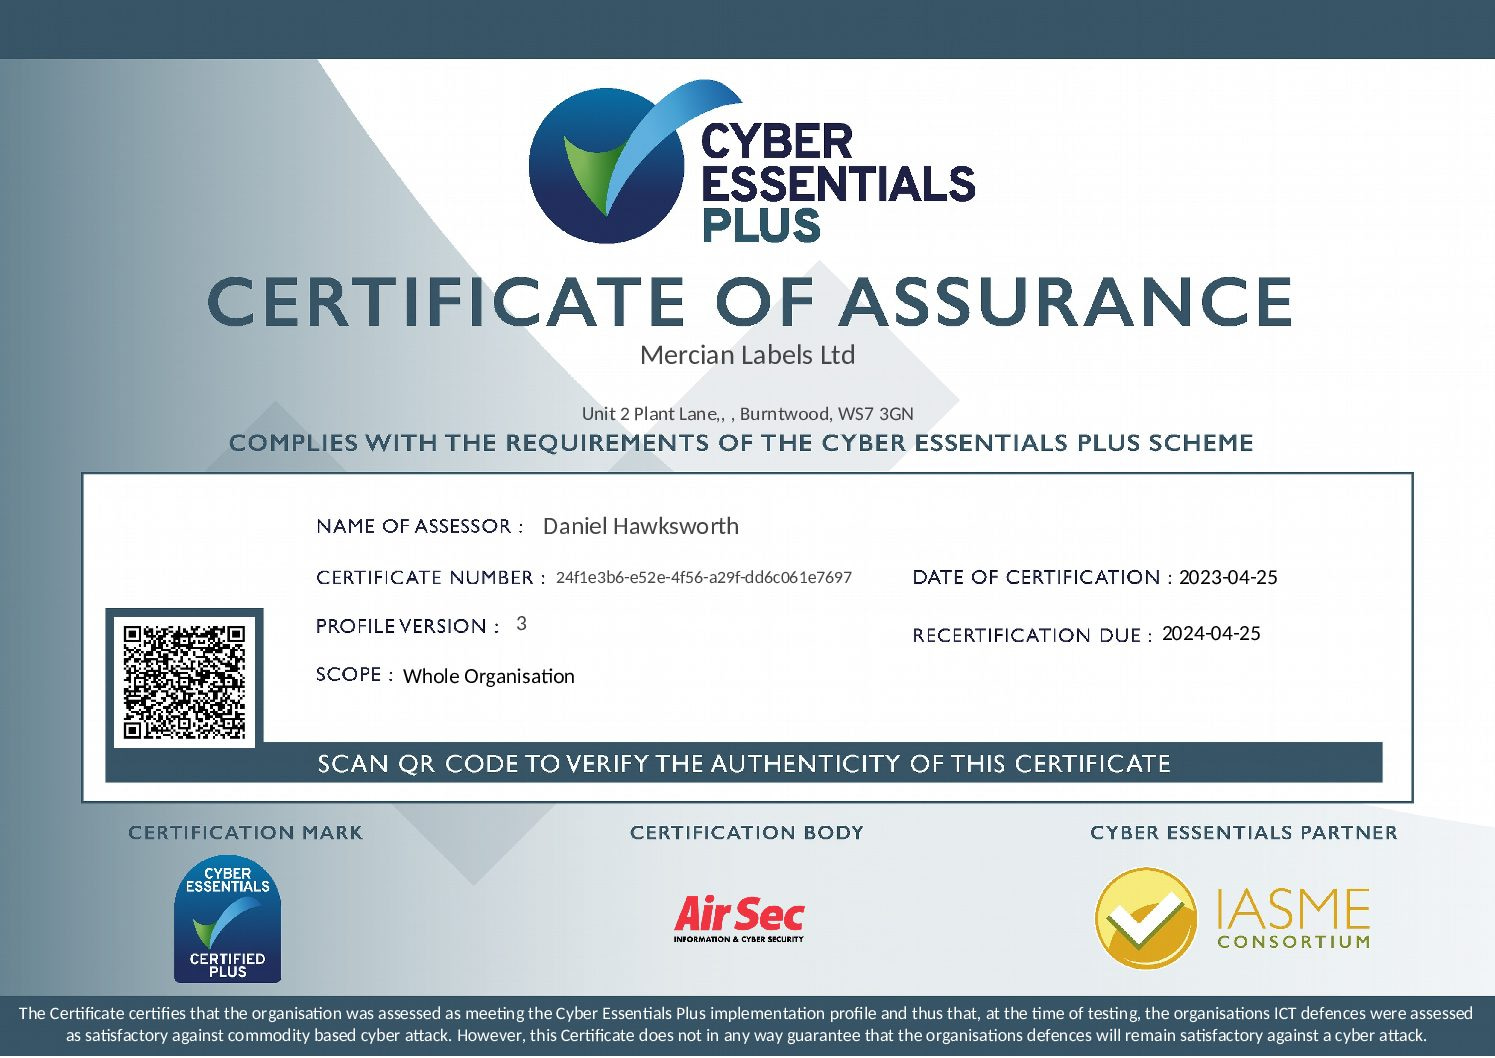 Cyber Essentials Plus Certificate for Mercian Labels